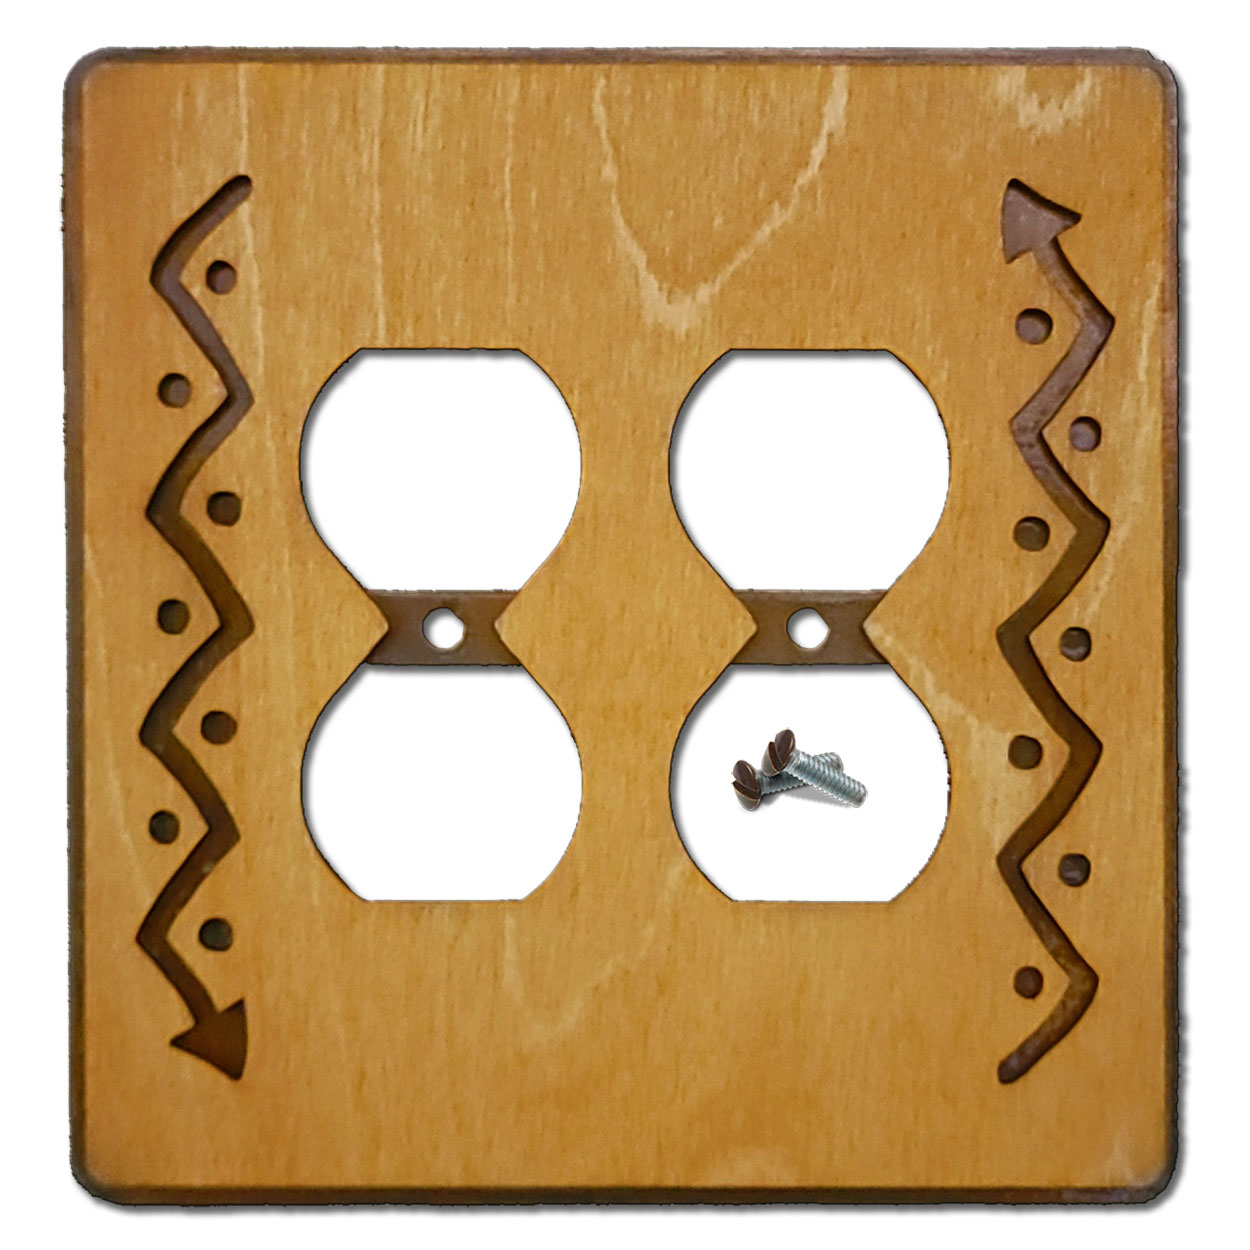 168525 -  Zig-Zag Arrow Southwestern Decor Double Outlet Cover in Golden Sienna